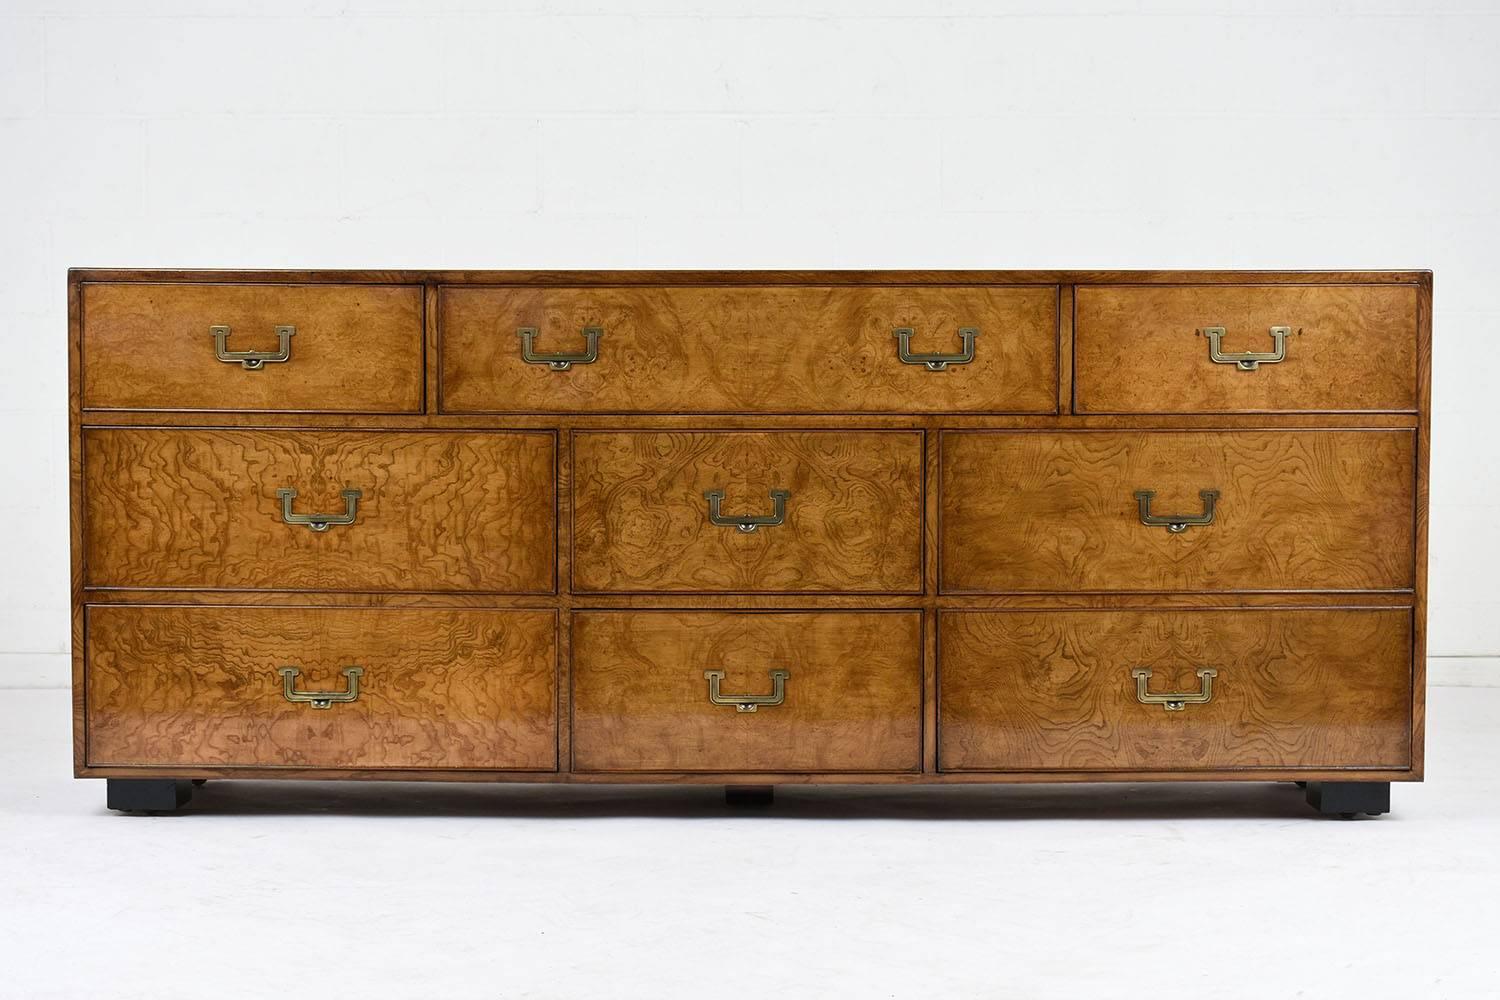 This 1960s modern style chest of drawers is made by John Widdicomb. The nine-drawer chest is covered in birch wood veneers stained in a rich light walnut color and a lacquered finish. The drawers have a delicate moulding accent along the edges with